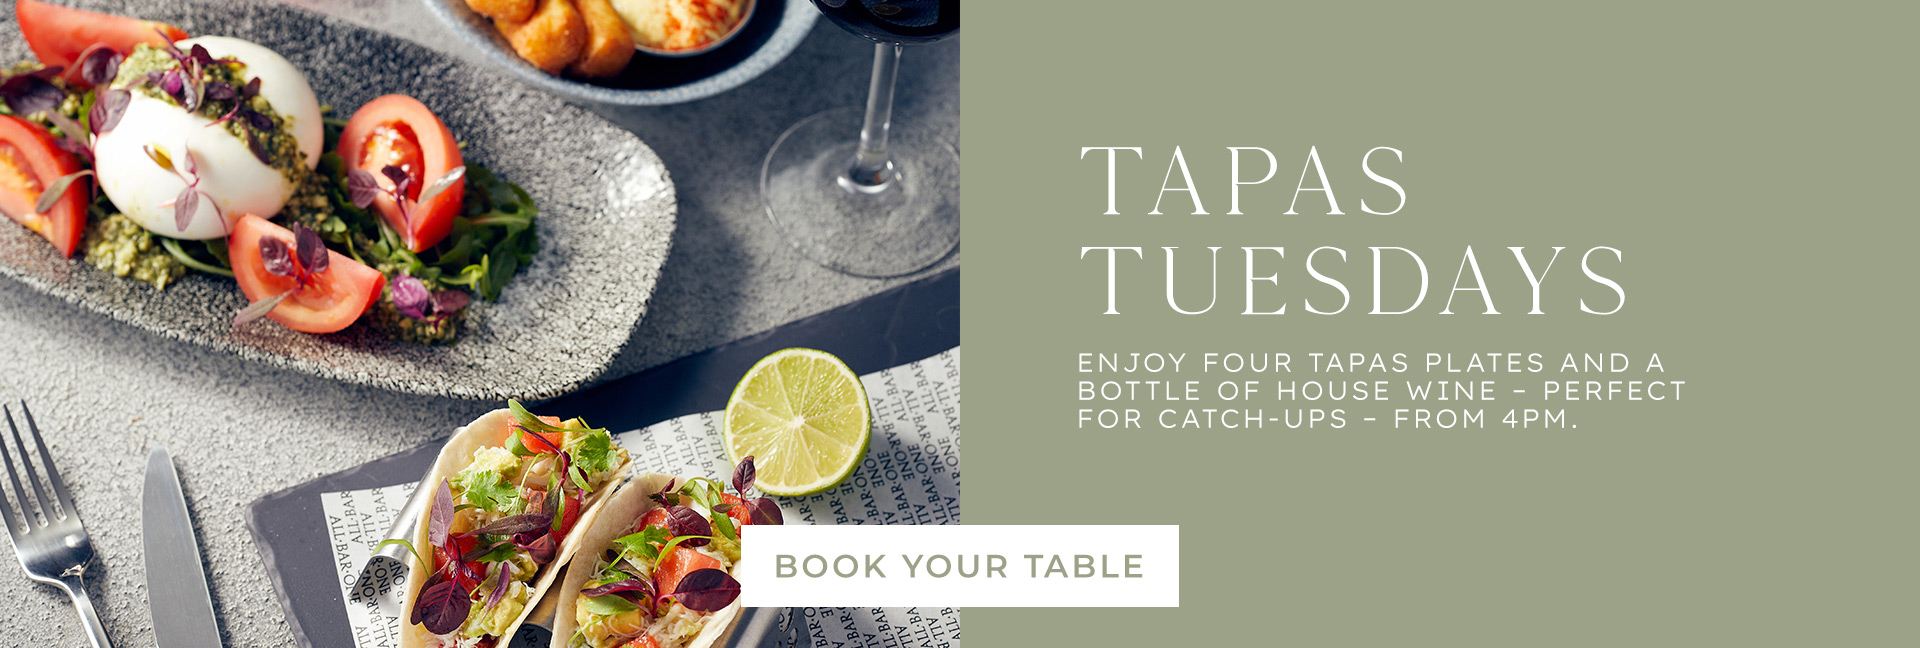 Tapas Tuesday at All Bar One Aberdeen - Book now